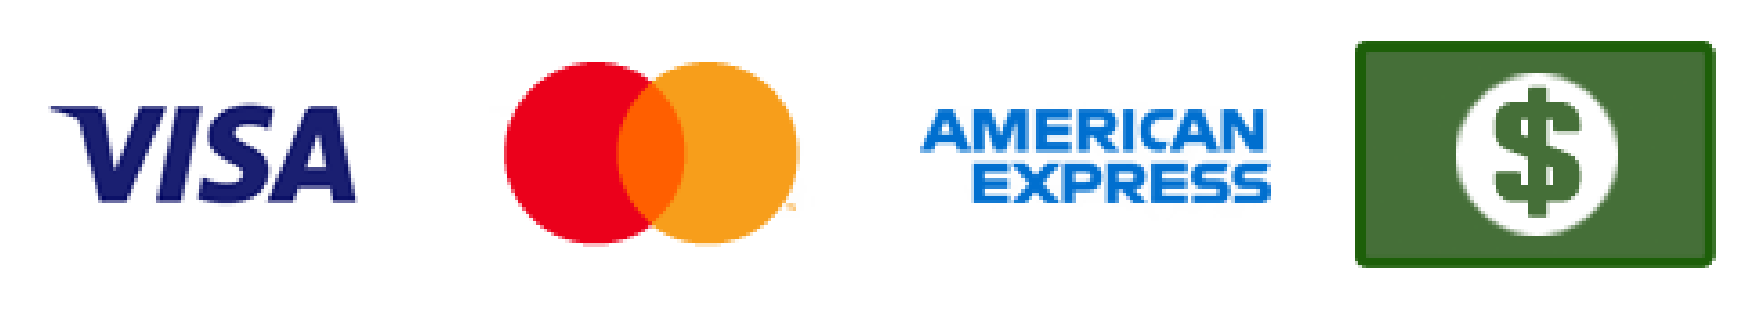 visa mastercard and american express logos on a white background